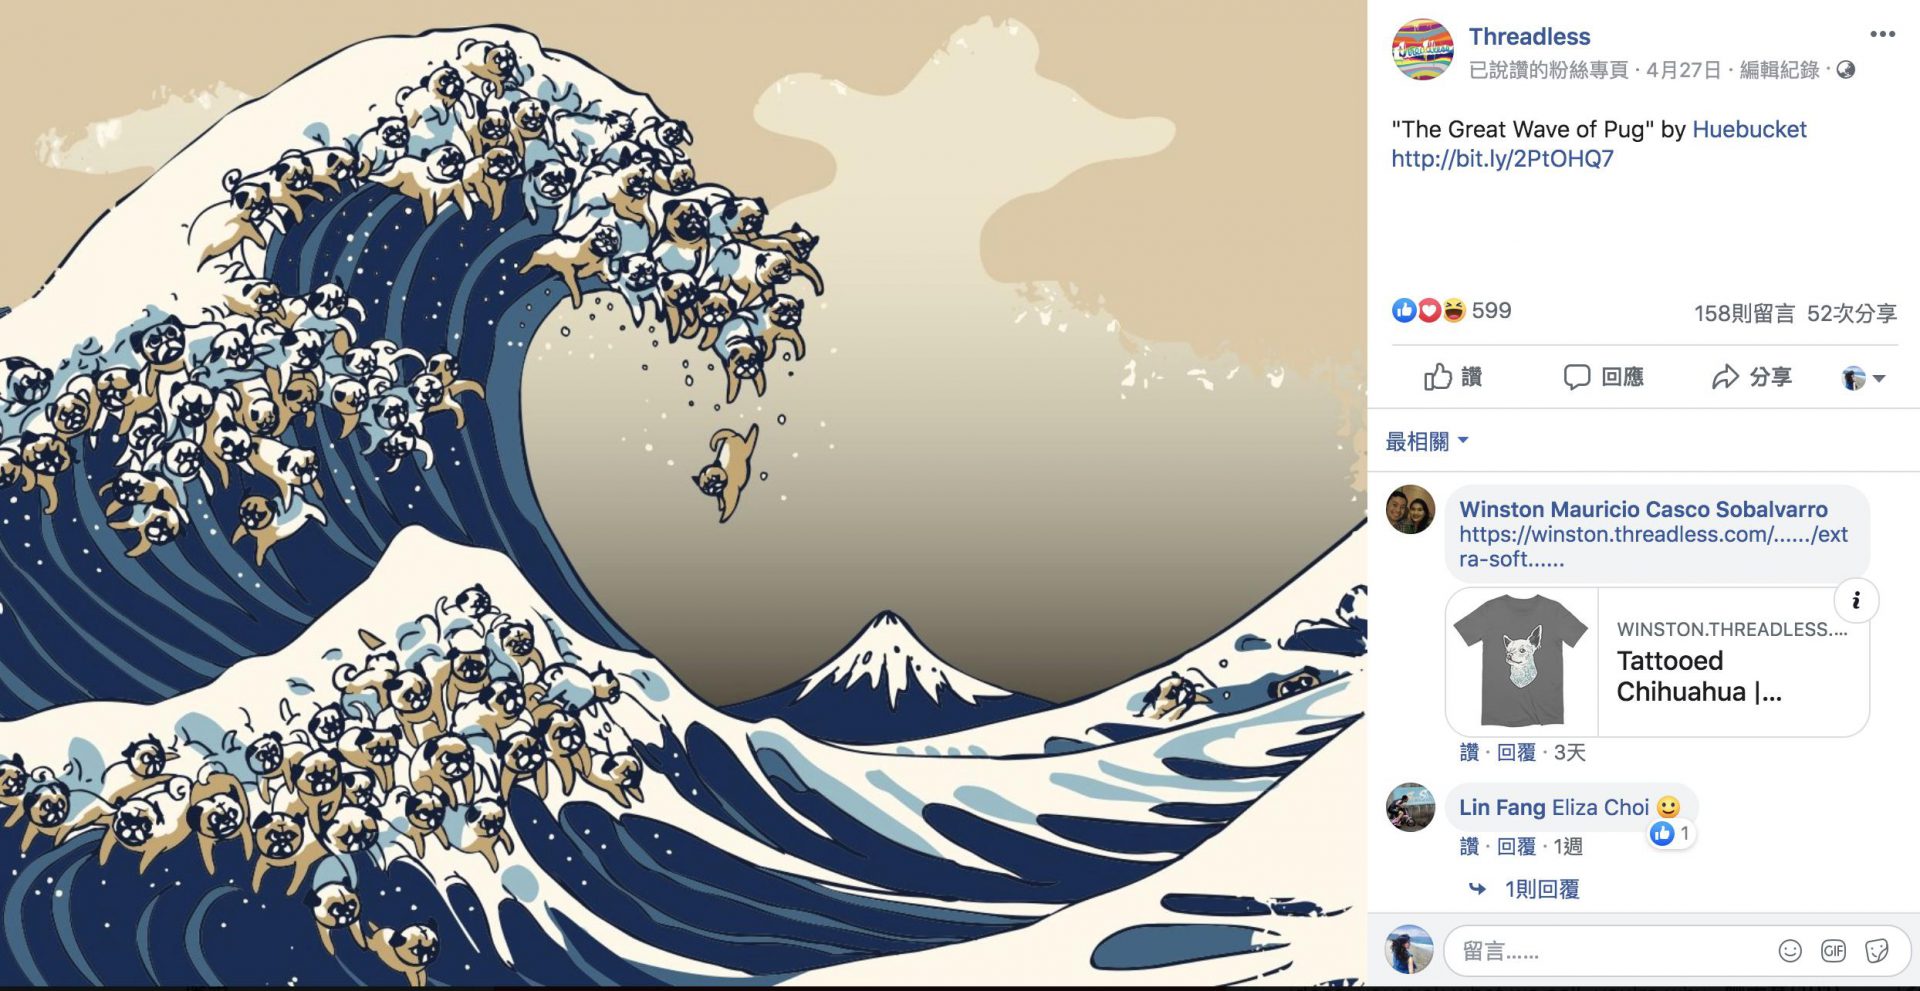 The Great Wave of Pug